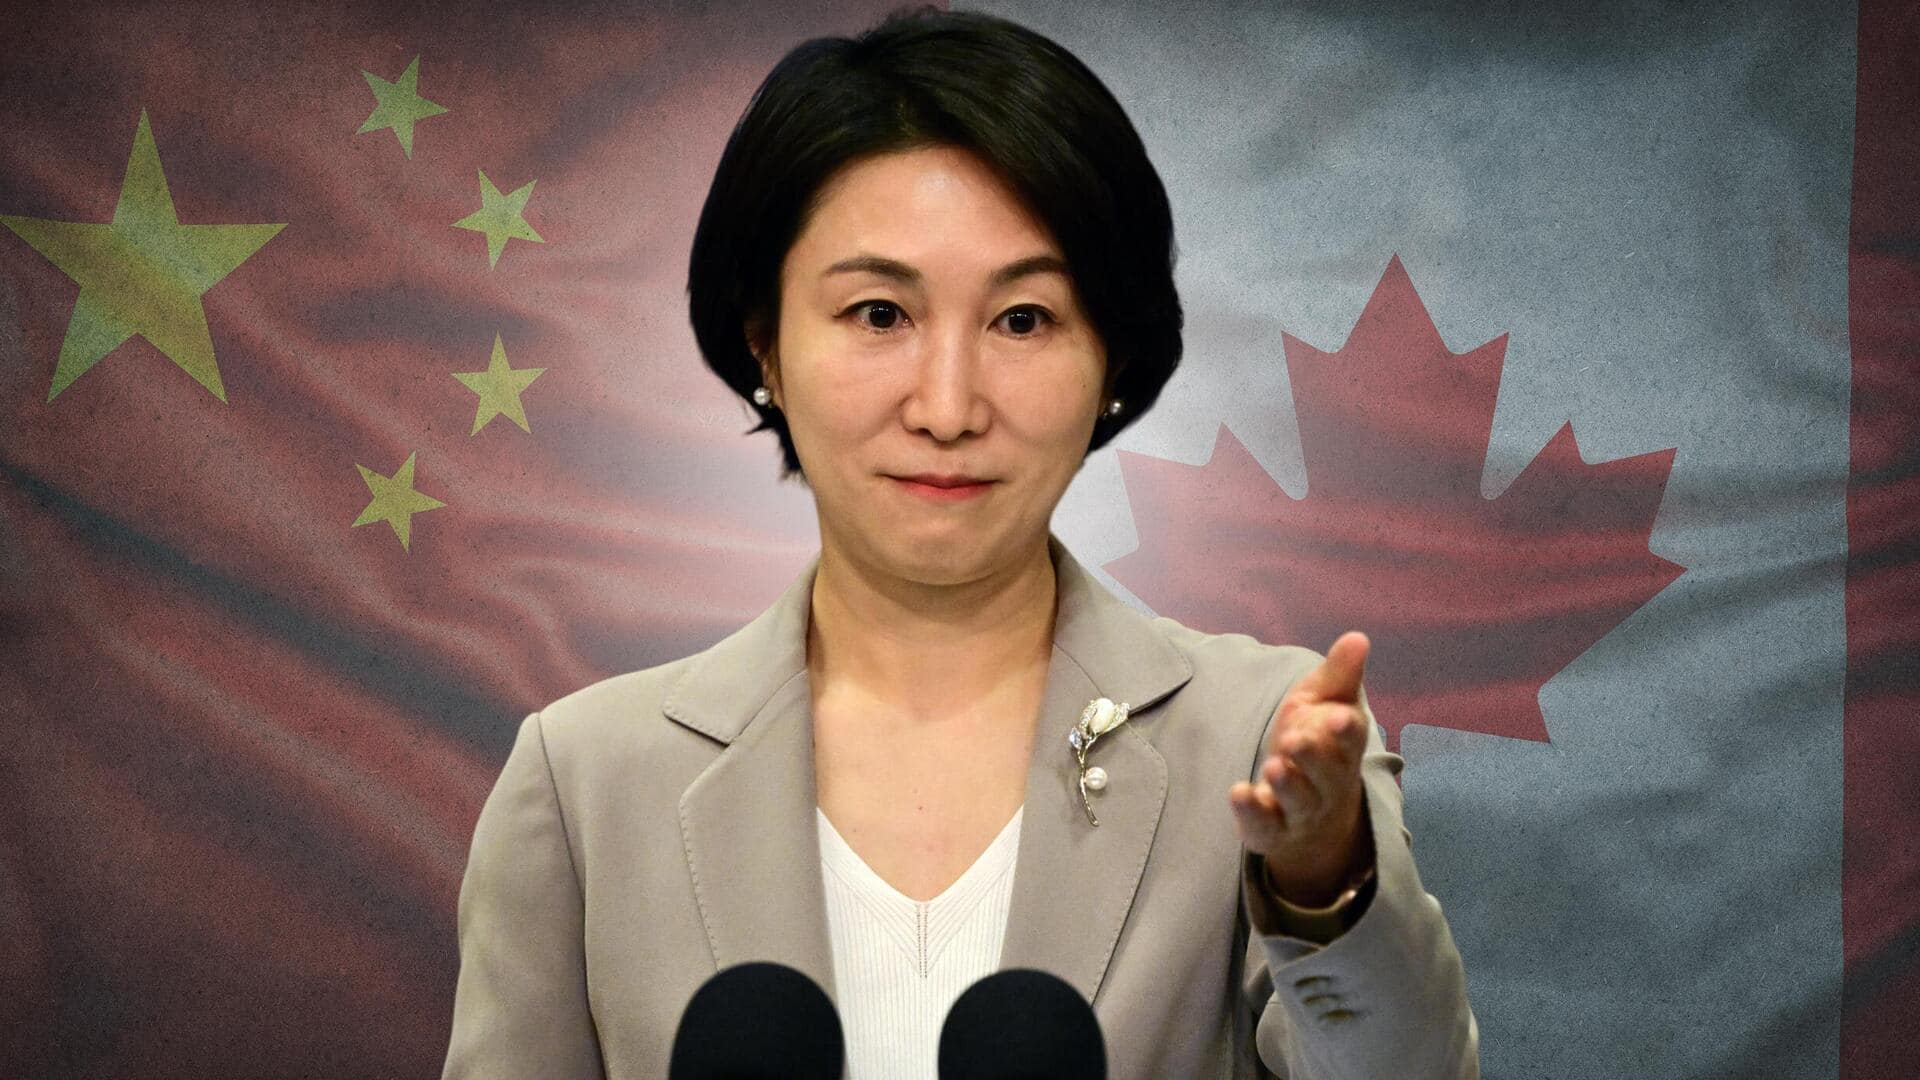 Canada's 'Spamoflage' hacking allegations ploy to smear China: Beijing